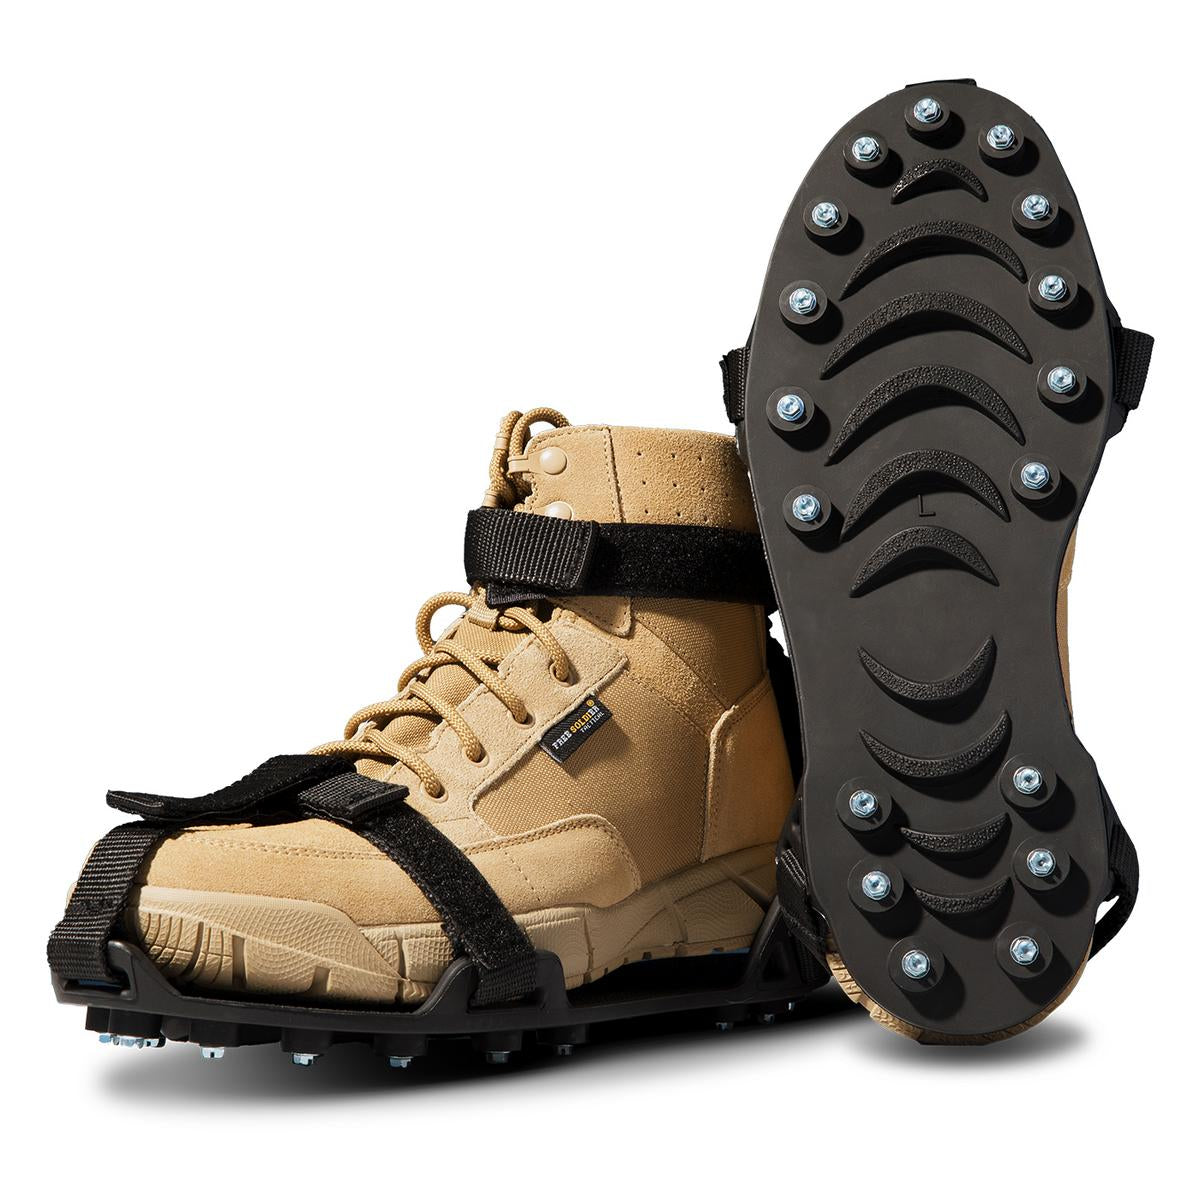 Action Traction Elite Hex Full-Foot Traction Ice Cleats - Front